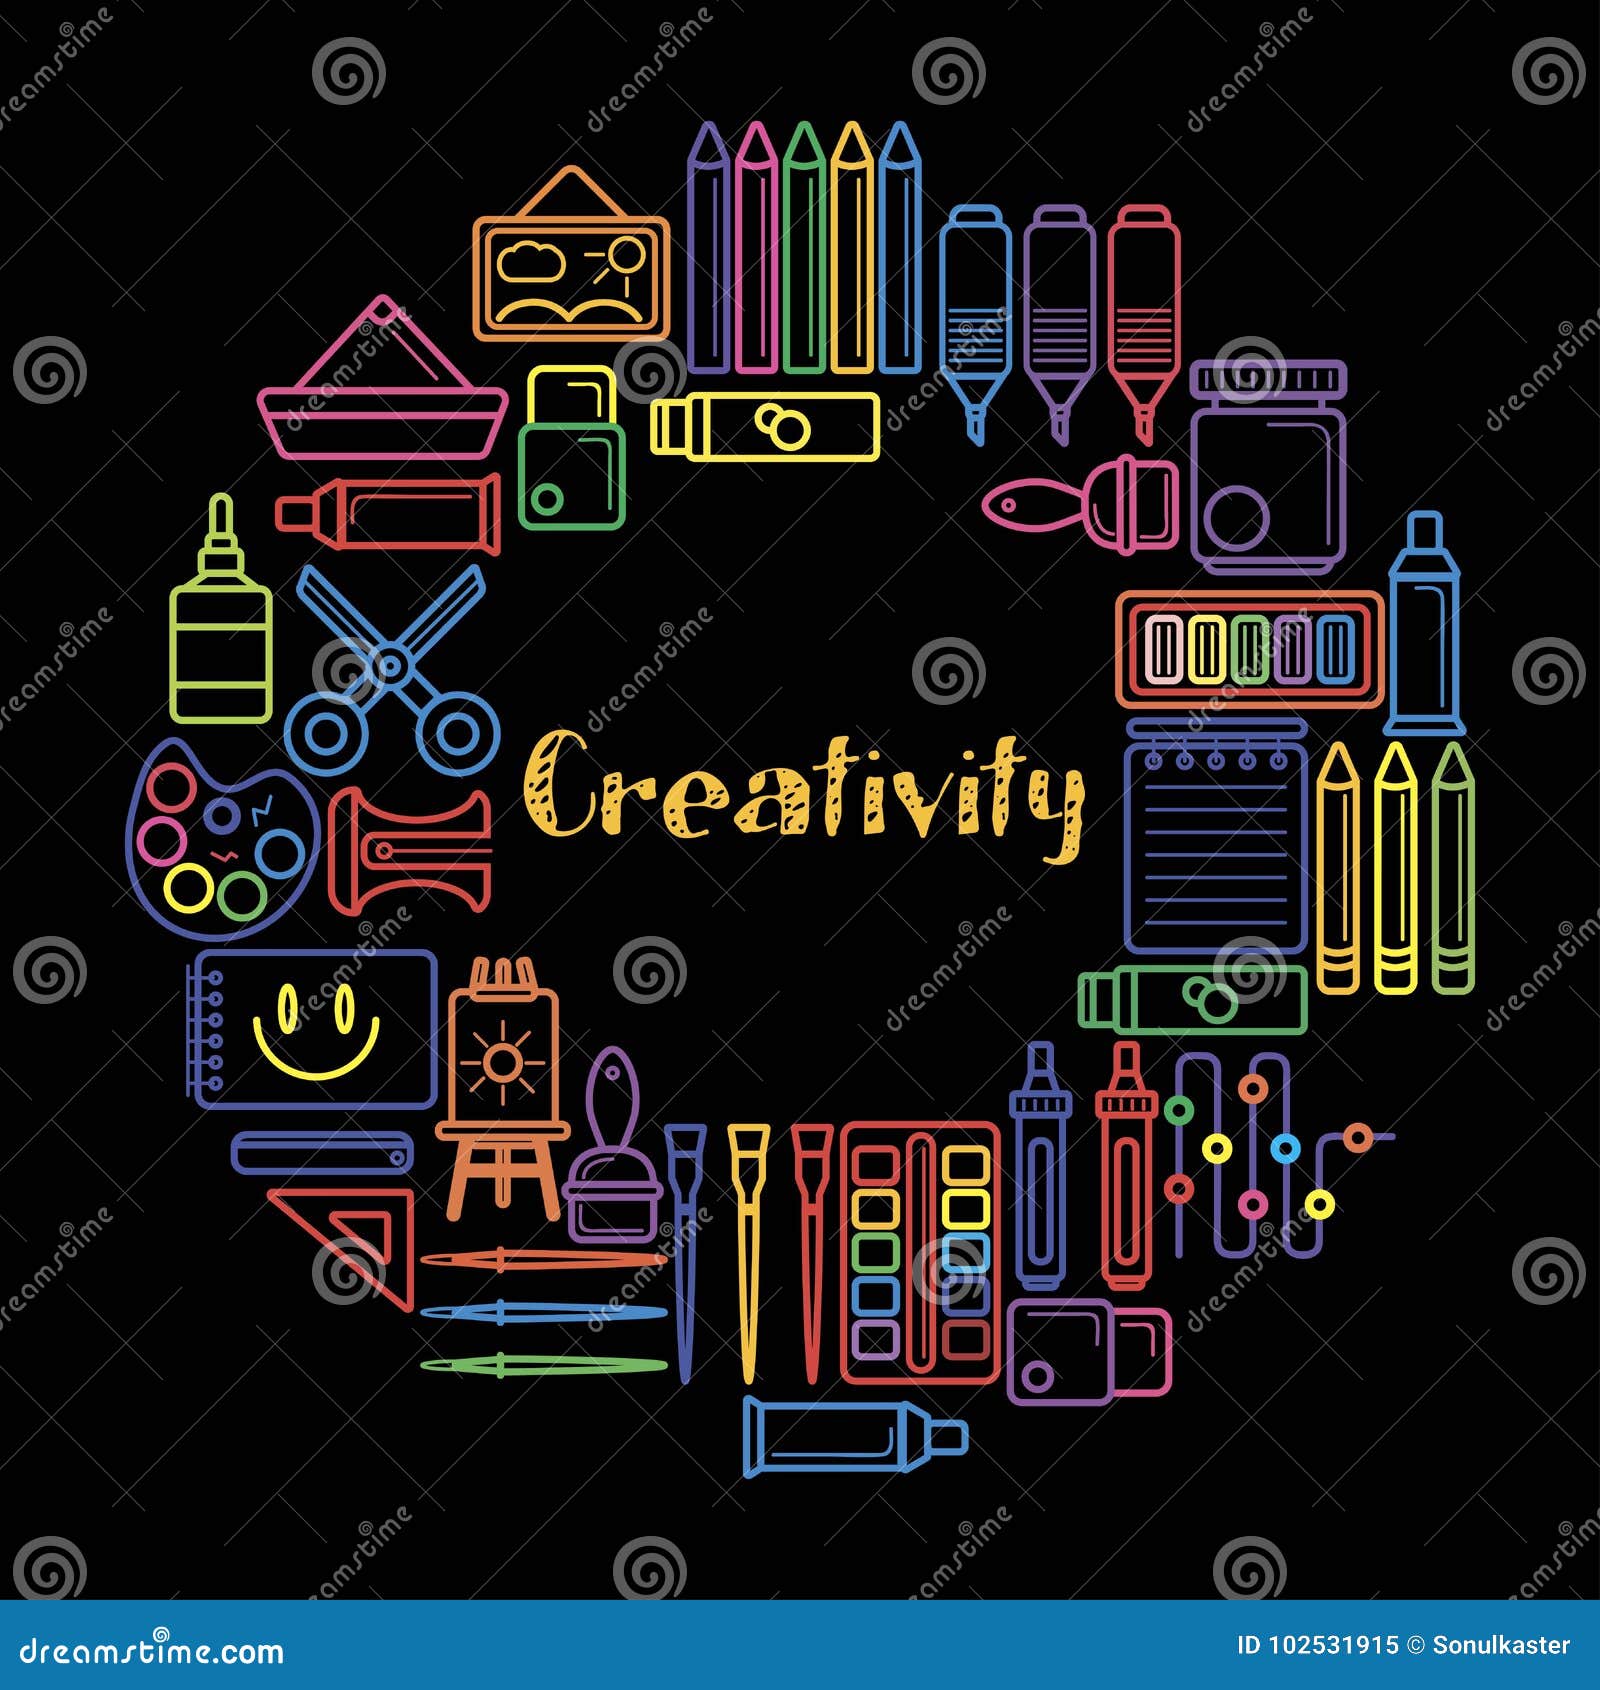 Kids Creativity Poster of Art and Drawing Tools for Children Creative  Design Education. Stock Vector - Illustration of graphic, chalk: 103912056